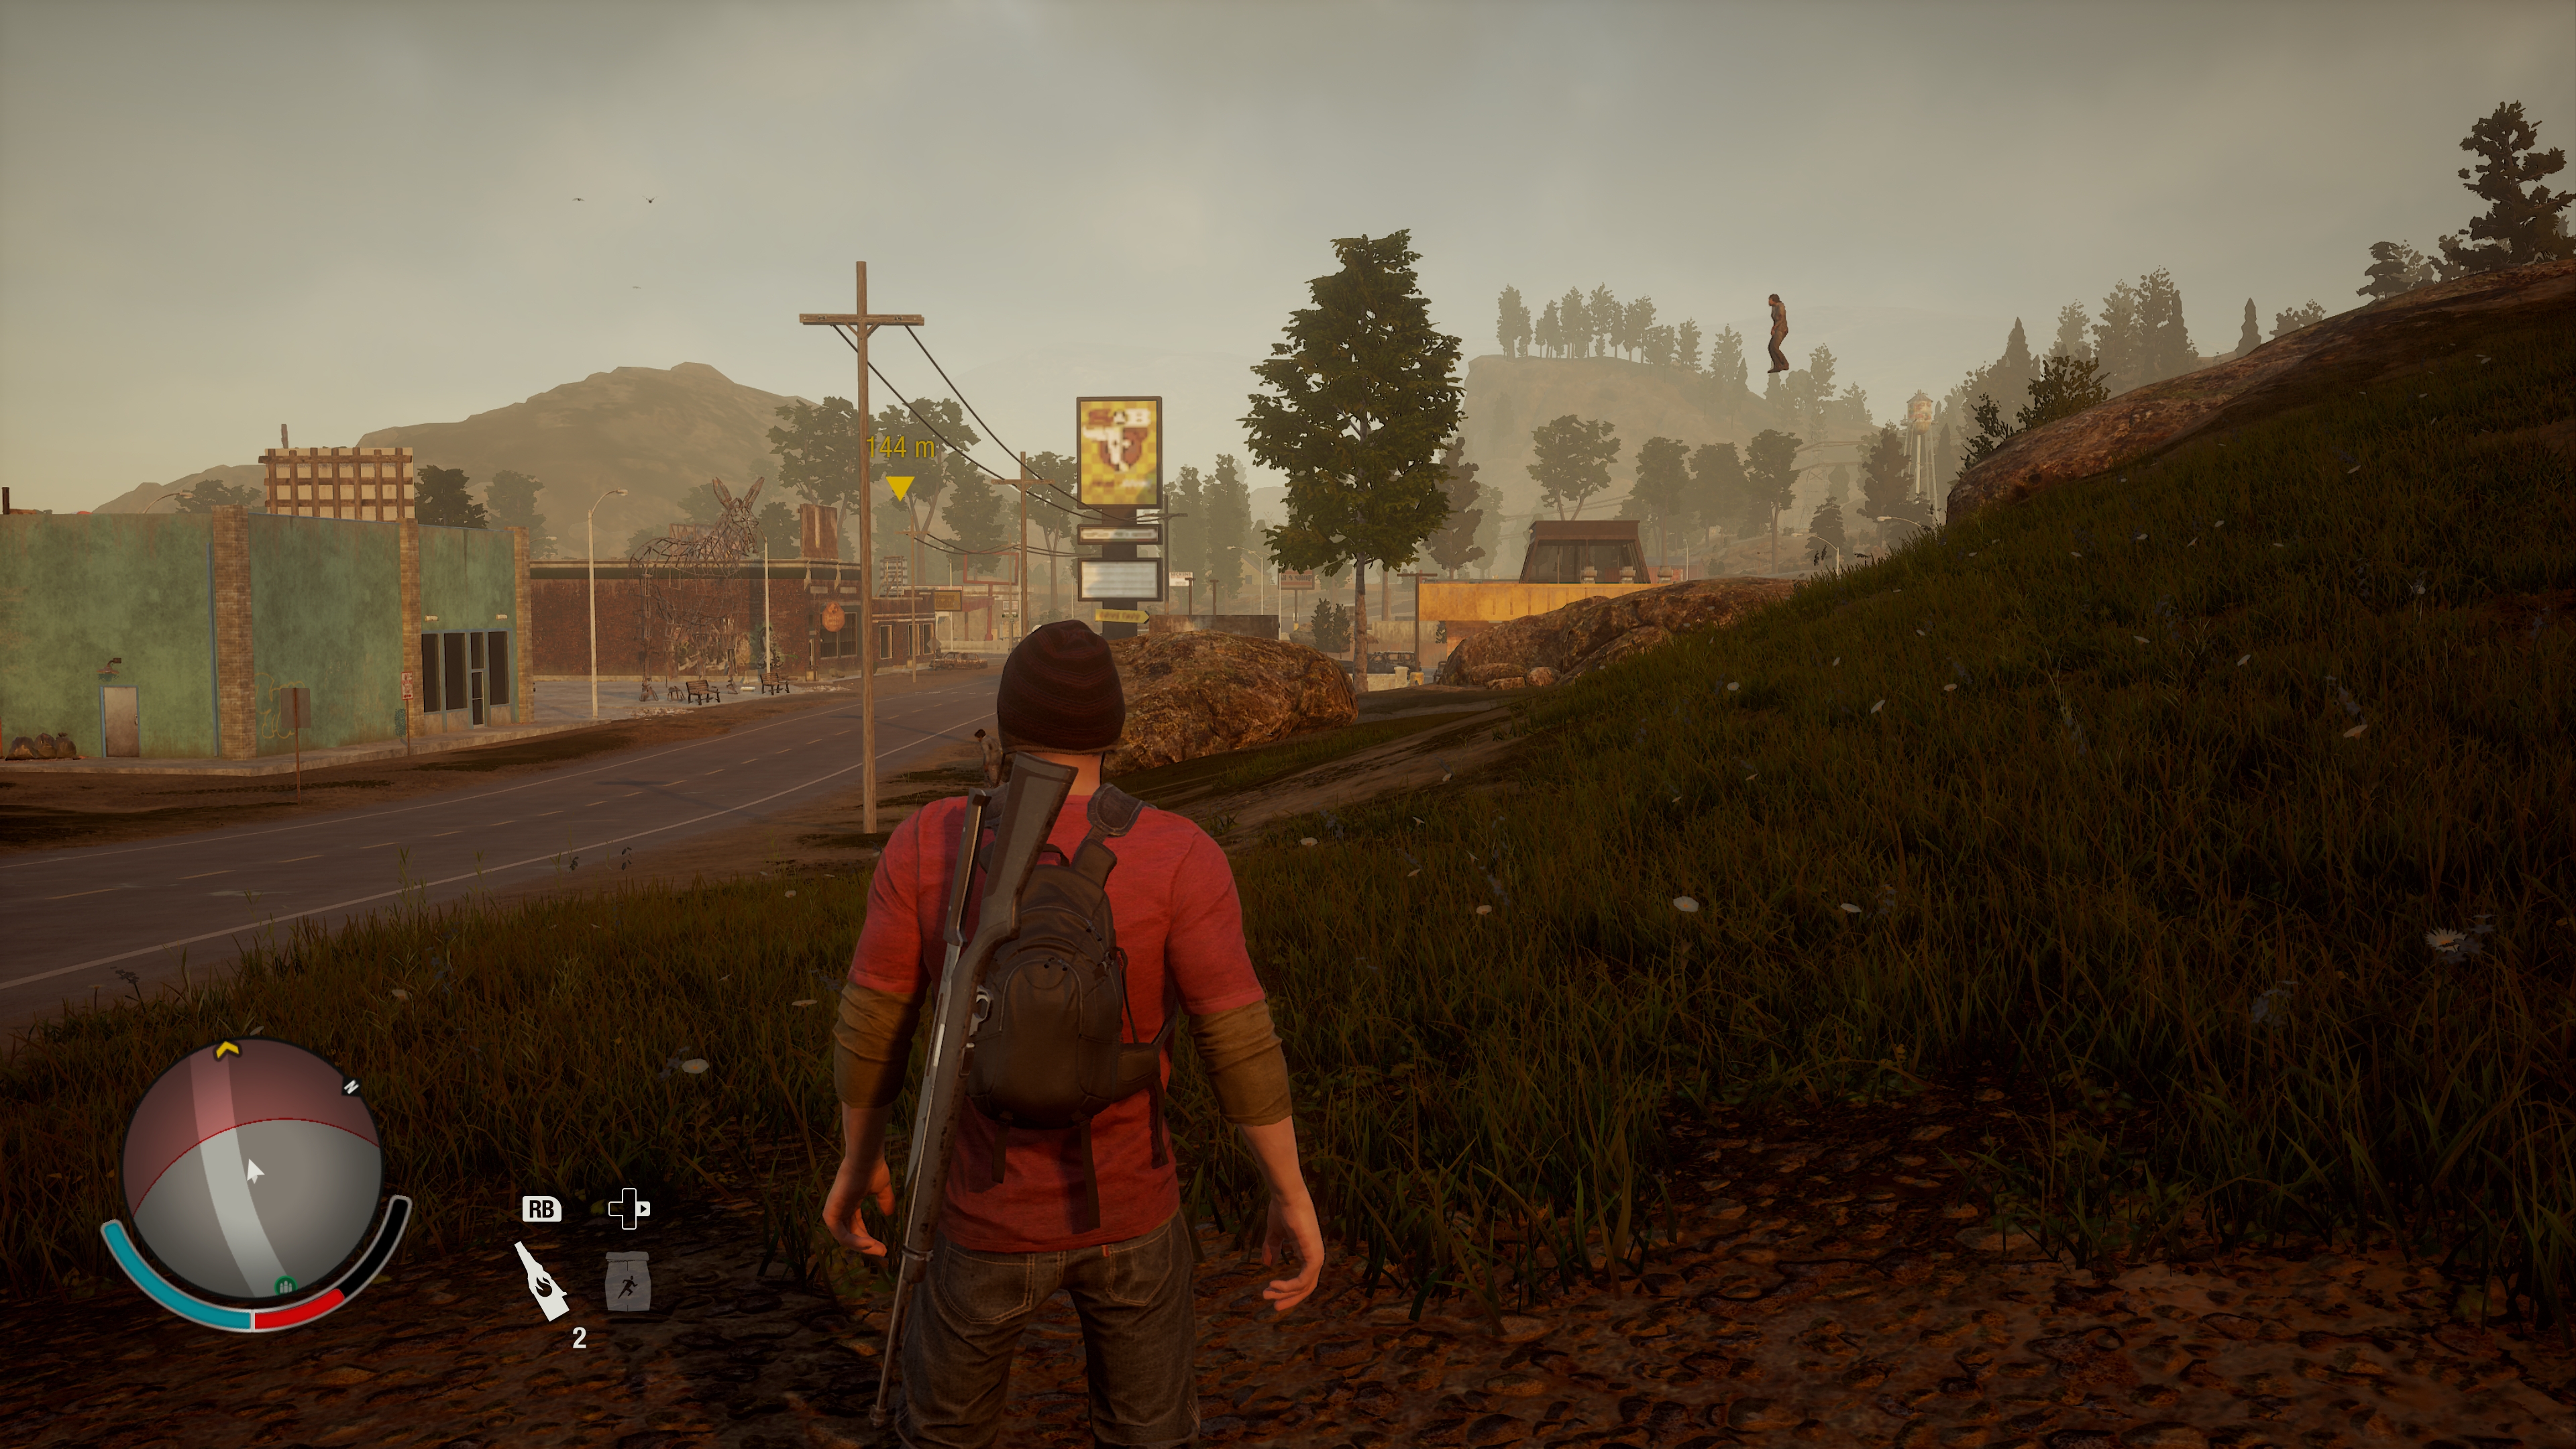 state of decay video game